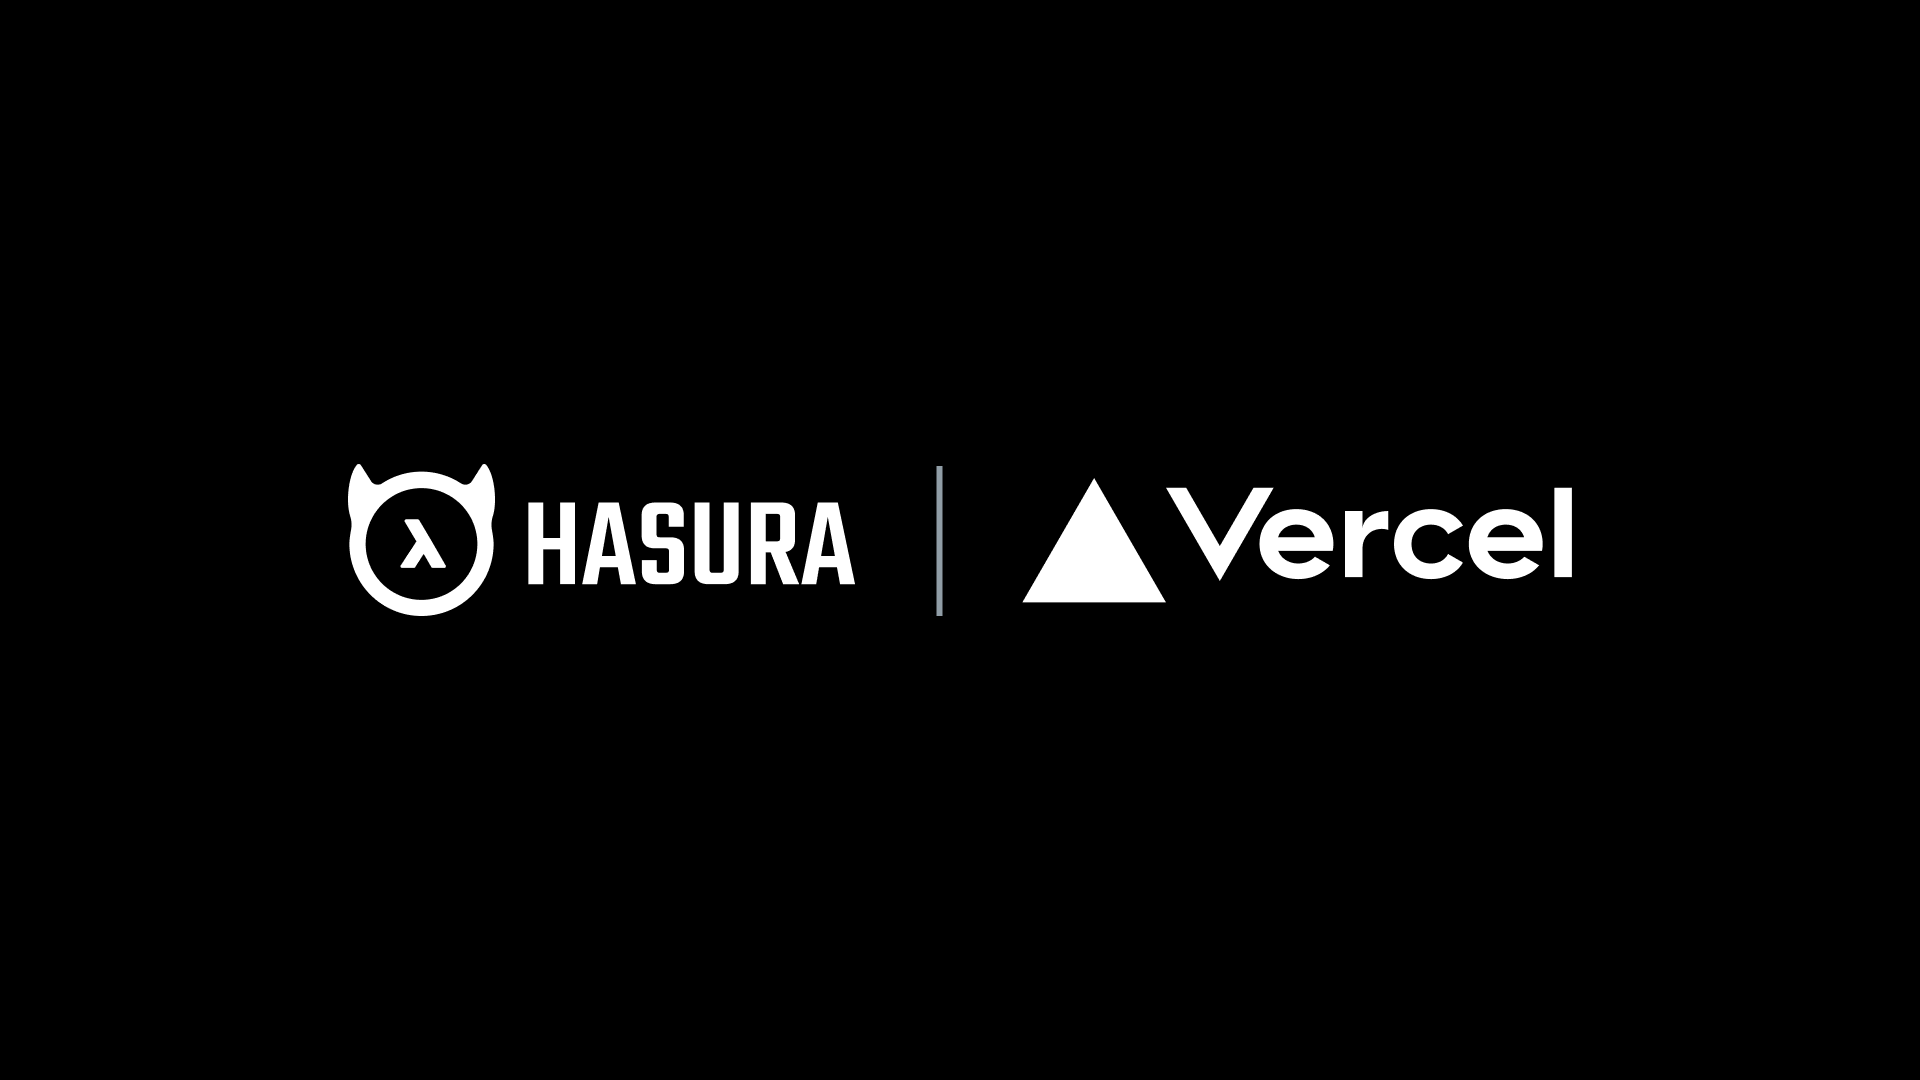 Announcing Vercel Integration with Hasura Cloud